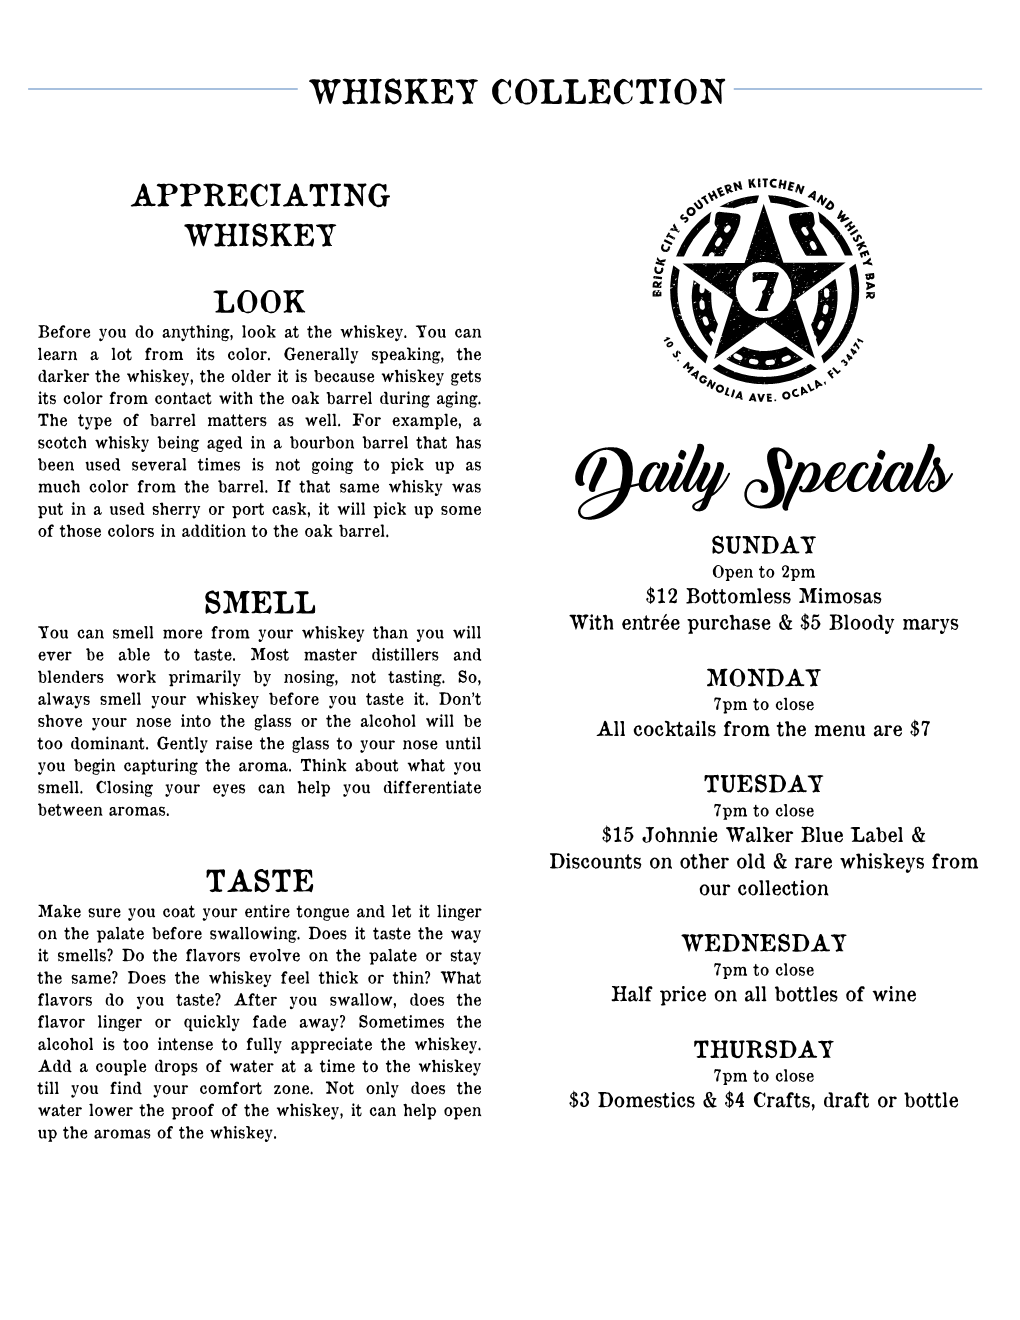 Daily Specials Put in a Used Sherry Or Port Cask, It Will Pick up Some of Those Colors in Addition to the Oak Barrel